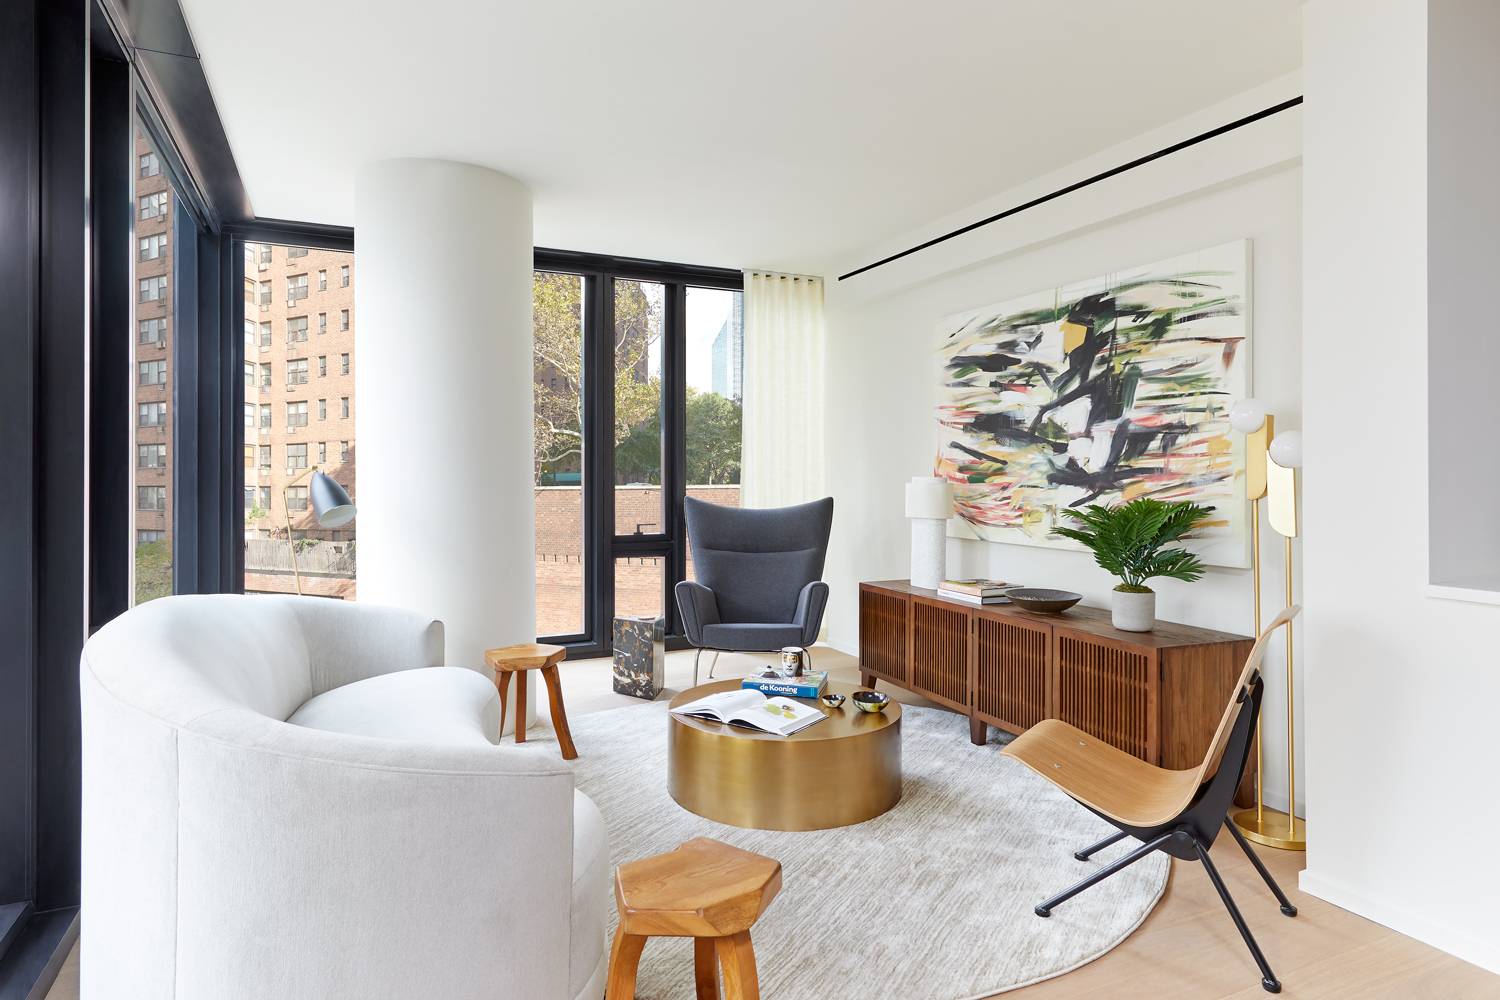 Distinct NYC apartment rentals designed by Richard Meier and Partners.